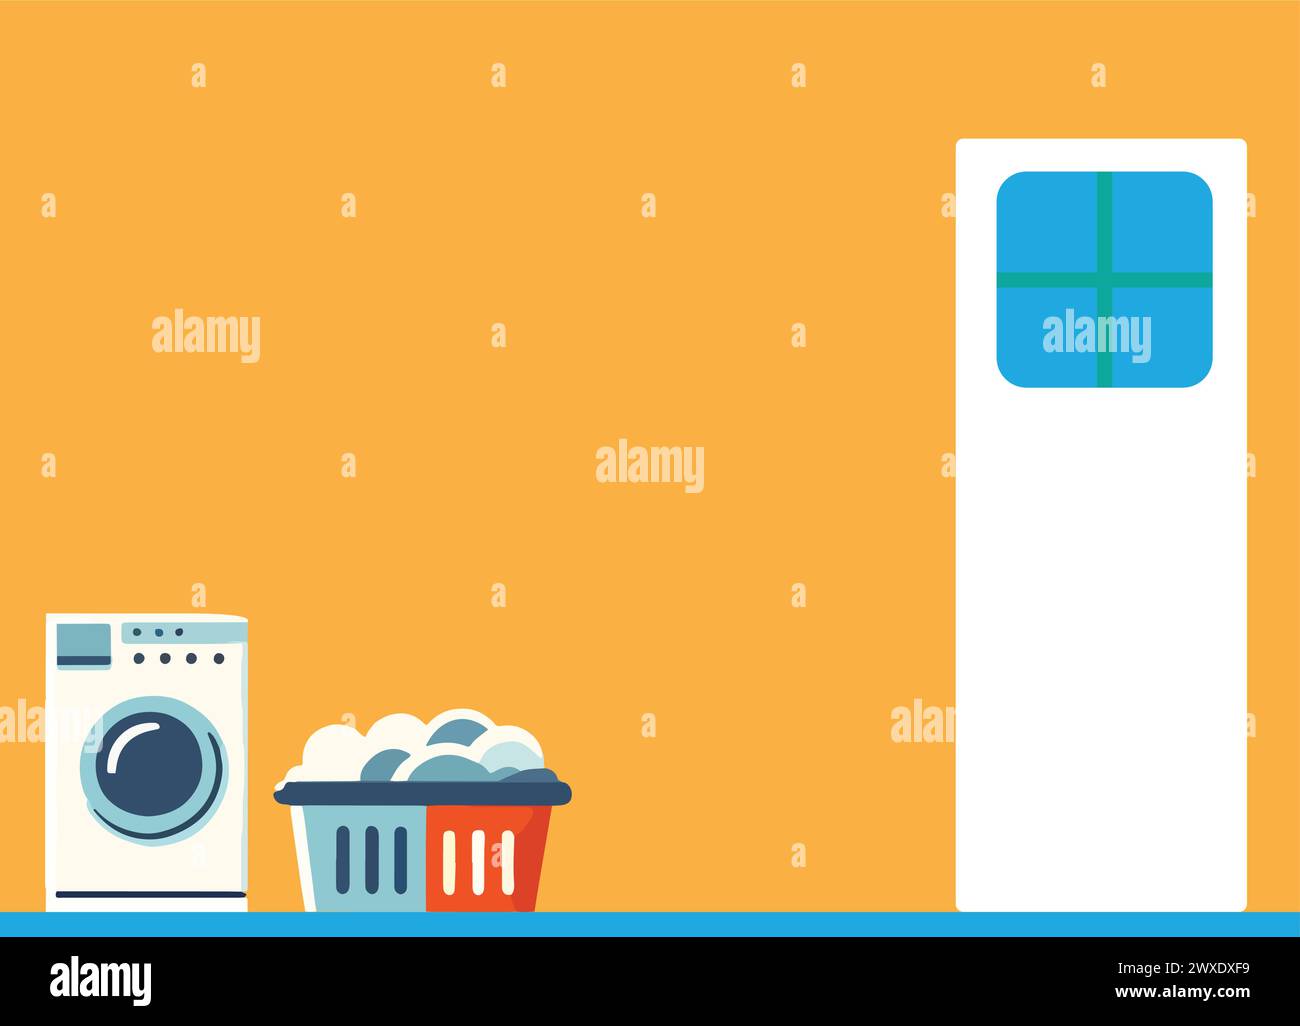 A orange laundry room with a front loading washing machine and a laundry basket with clothes in it. There is a white door in the background. Stock Vector